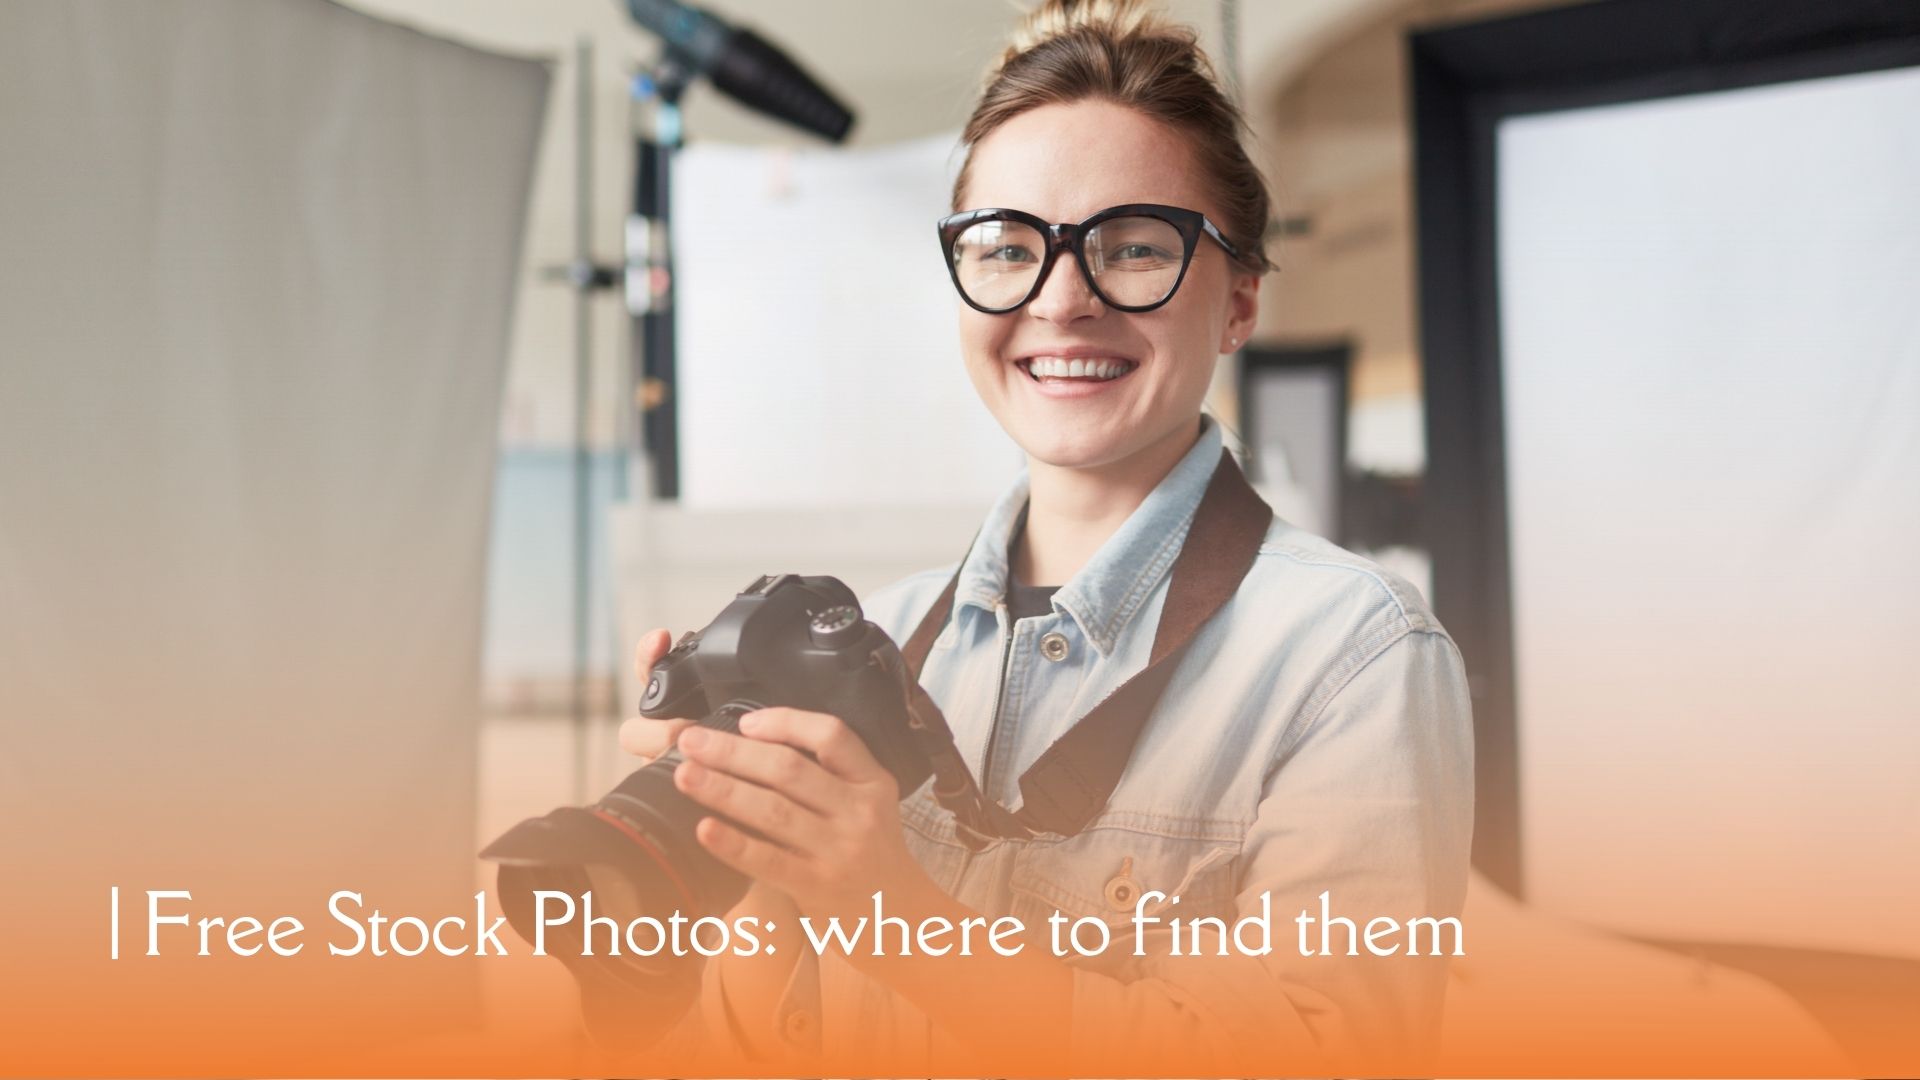 Photographer taking free stock pictures